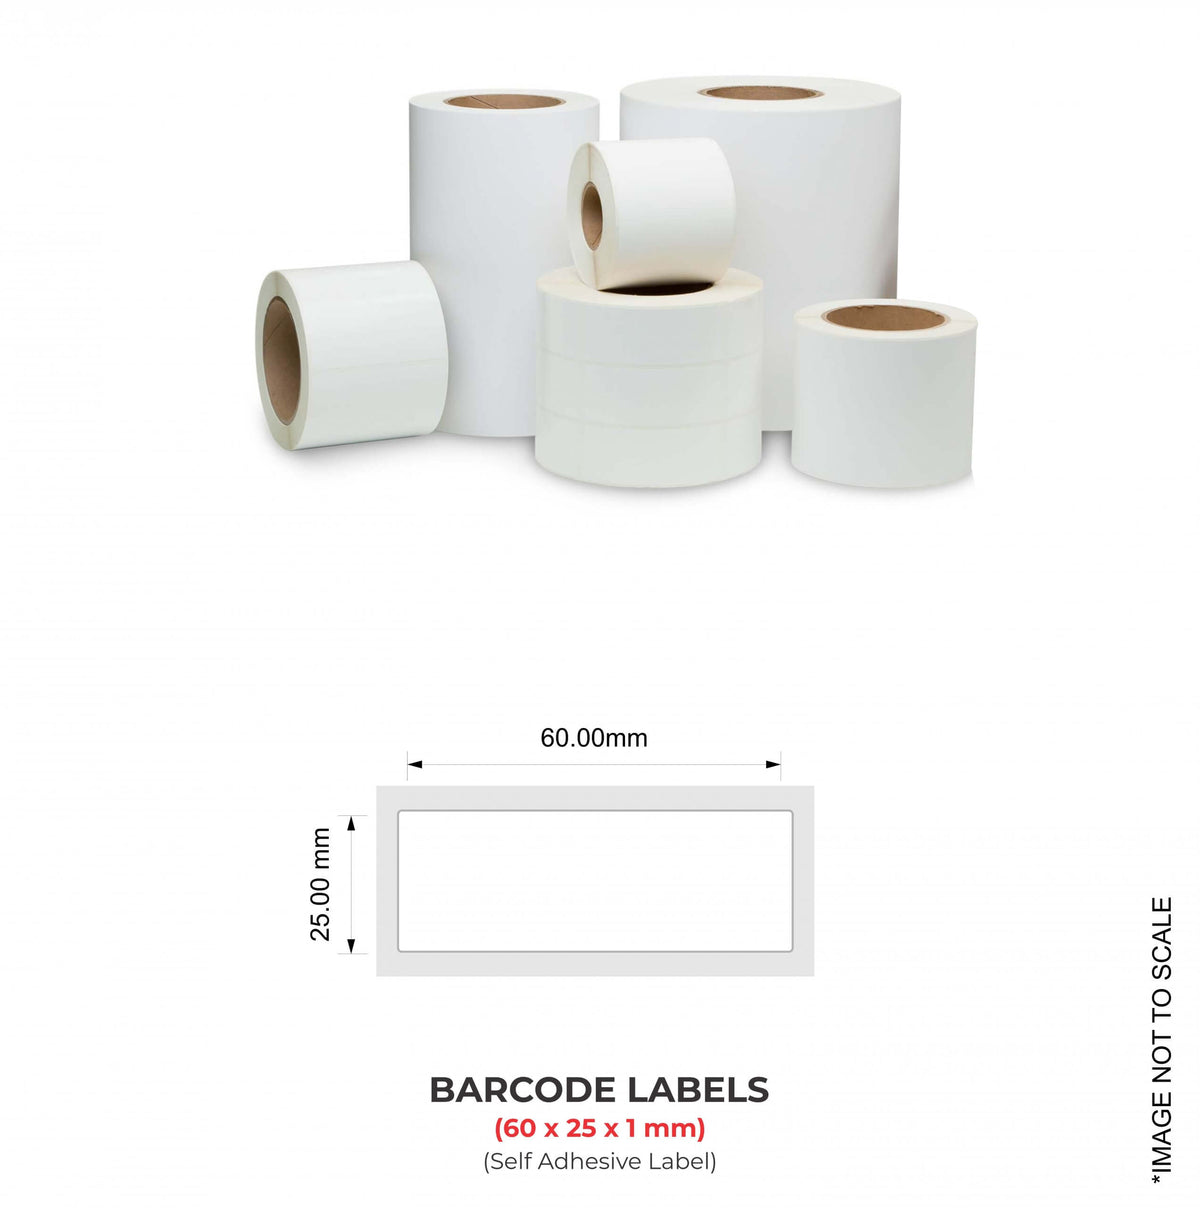 Barcode Labels (60mm x 25mm x 1), 2000 Labels Per Roll (Self Adhesive Label)